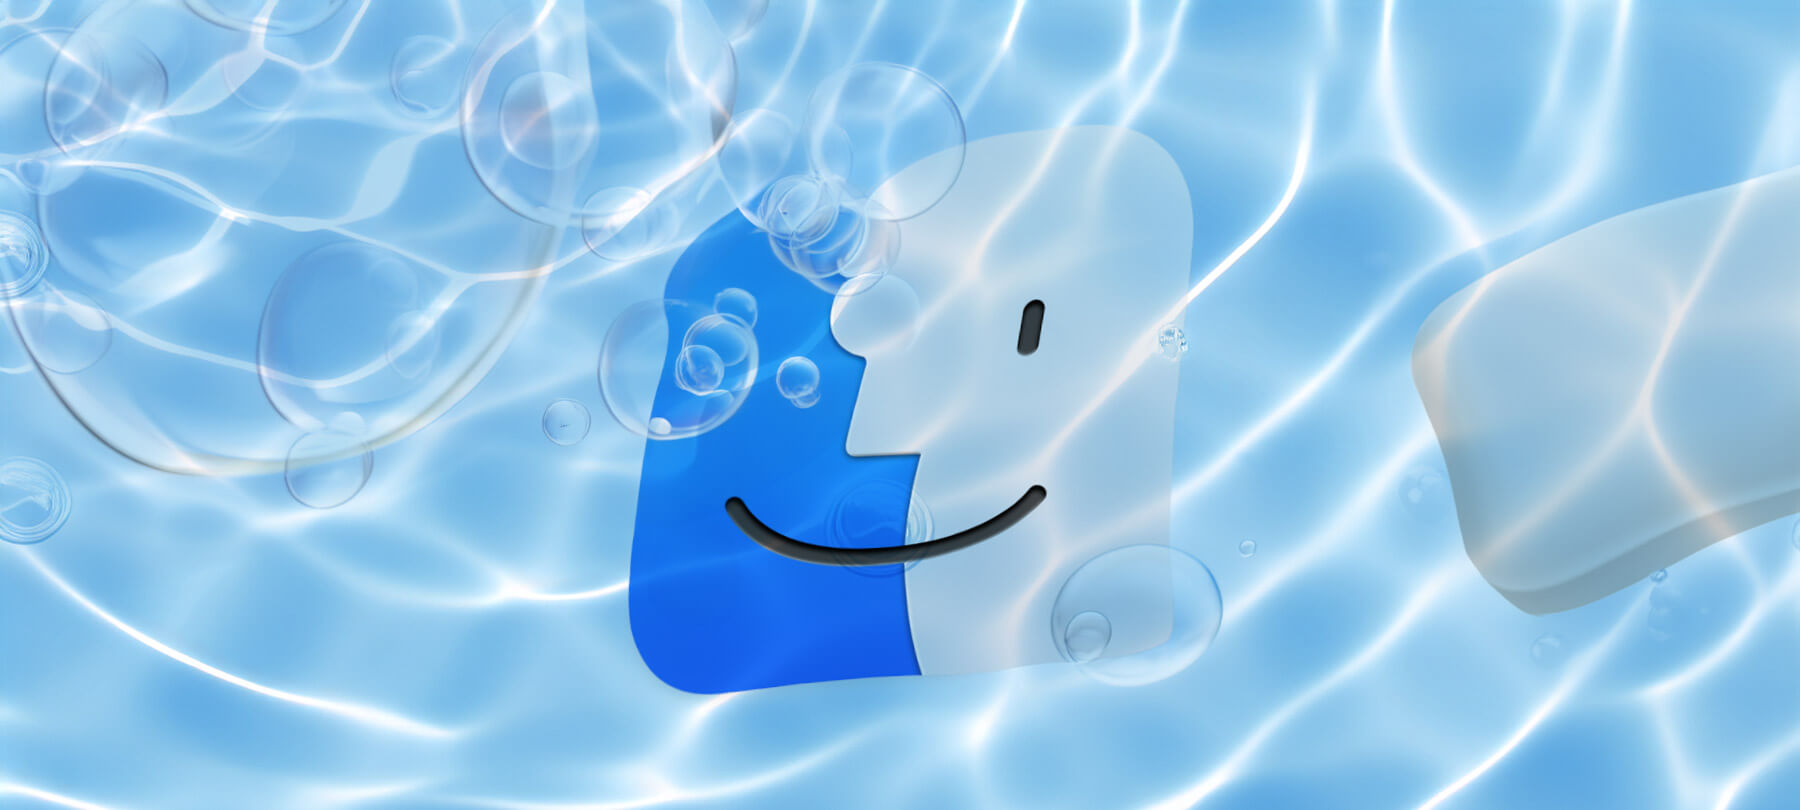 macOS finder icon under water, being washed with soap